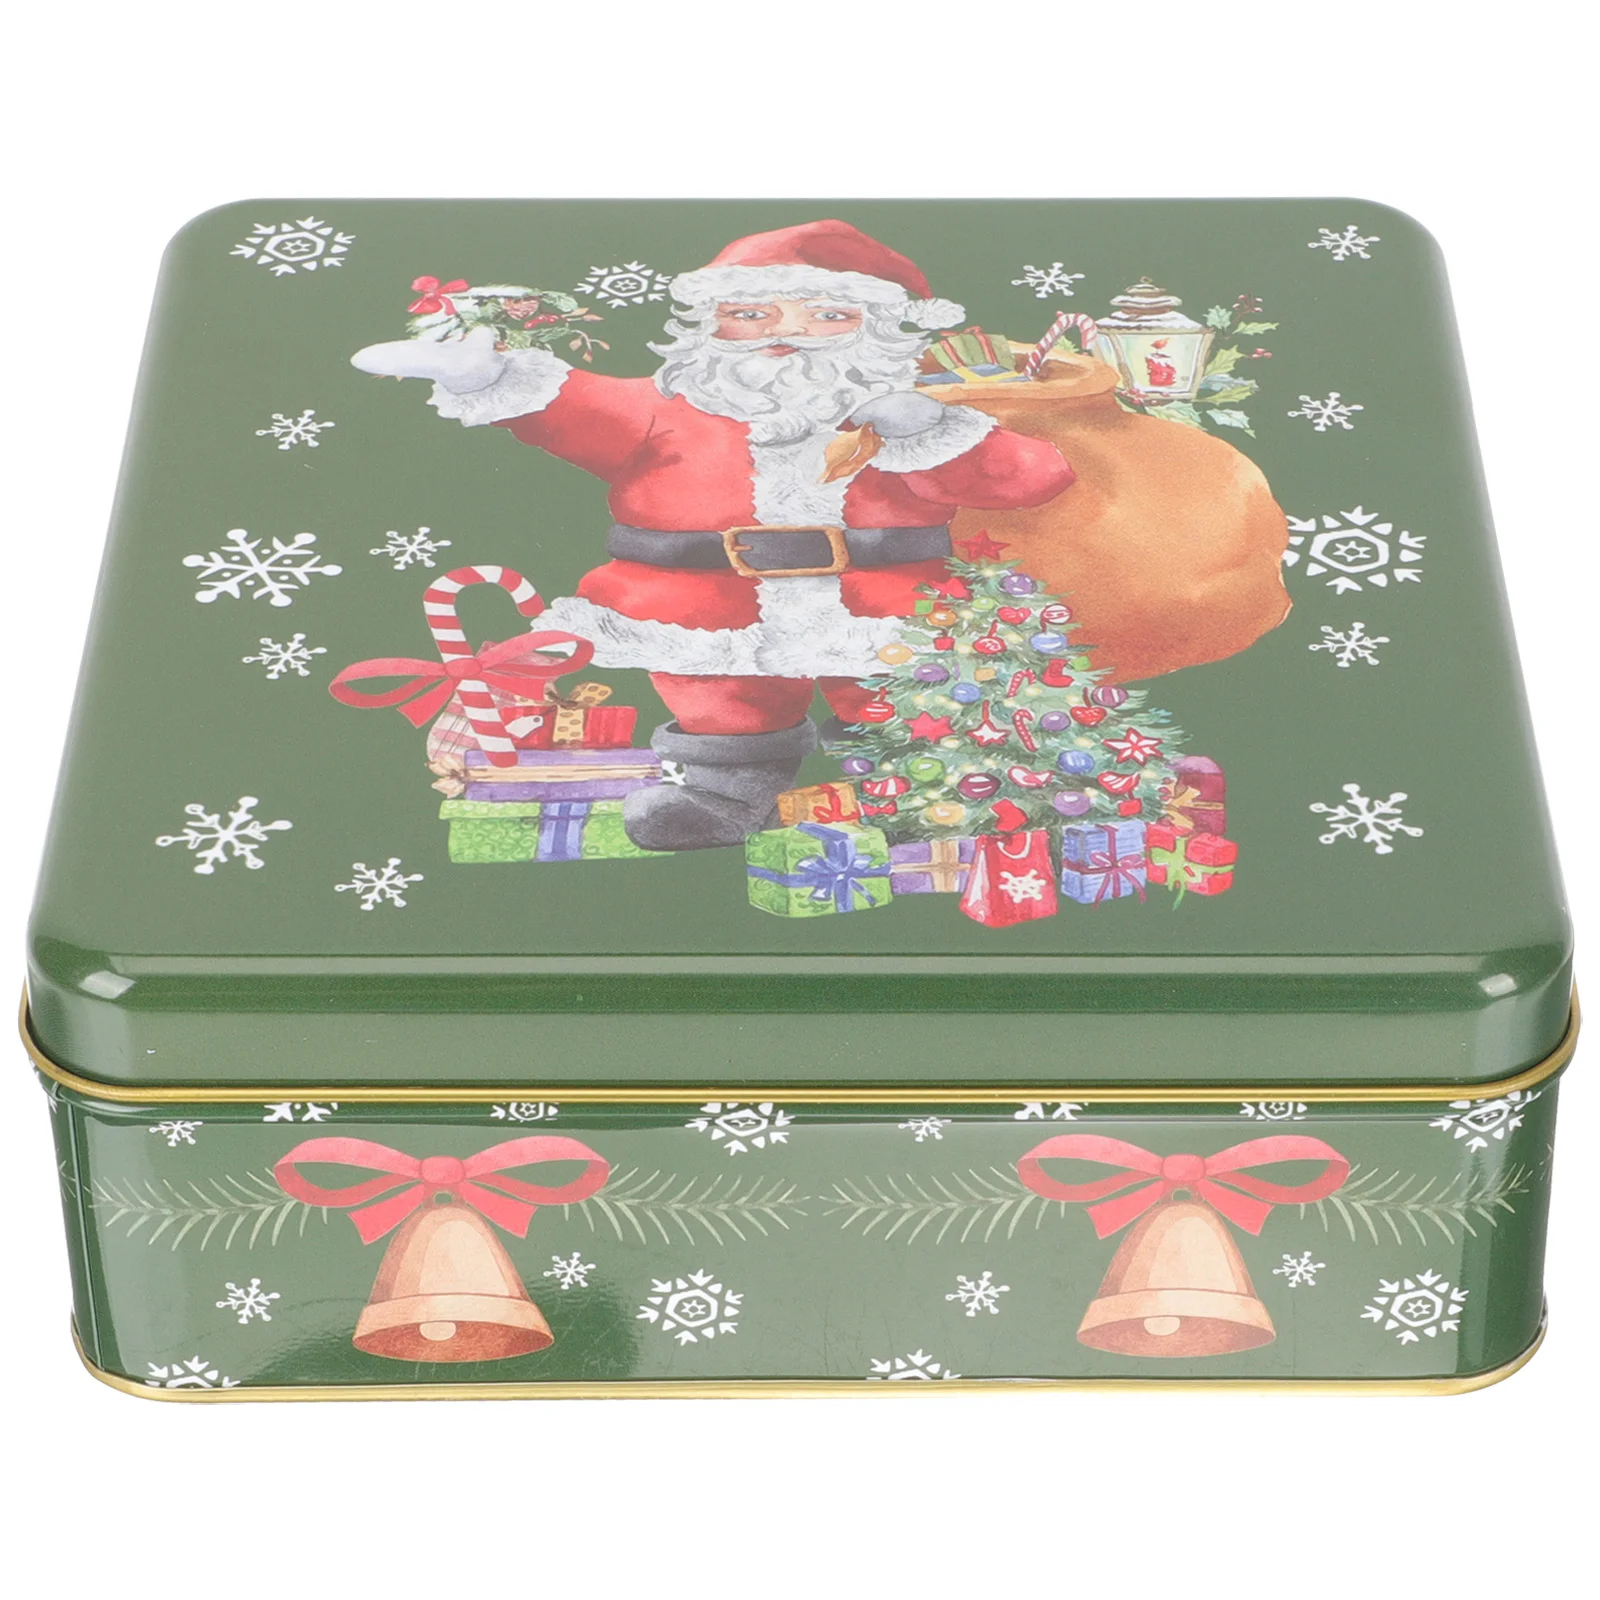 

Christmas Box Tin Cookie Candy Tinplate Gift Tins Boxes Containerscontainer Metal Lidssanta Favor Storage Treat Giving Jar